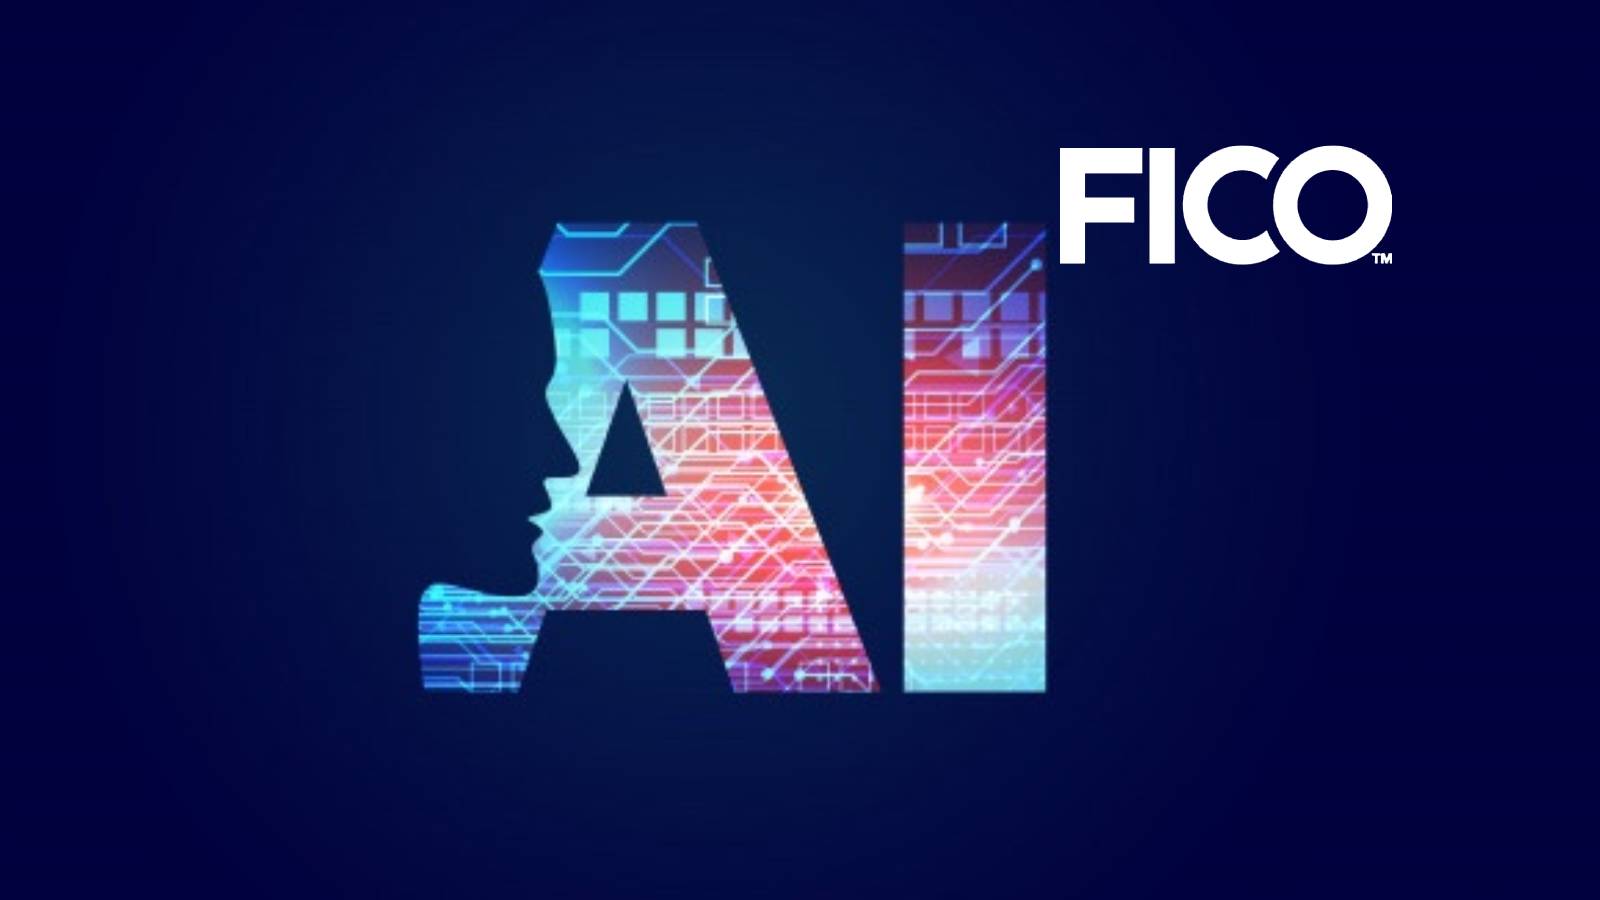 FICO Awarded 9 New Patents Used in FICO Platform and Fraud Solutions that Utilize Sophisticated AI to Improve Decision Accuracy